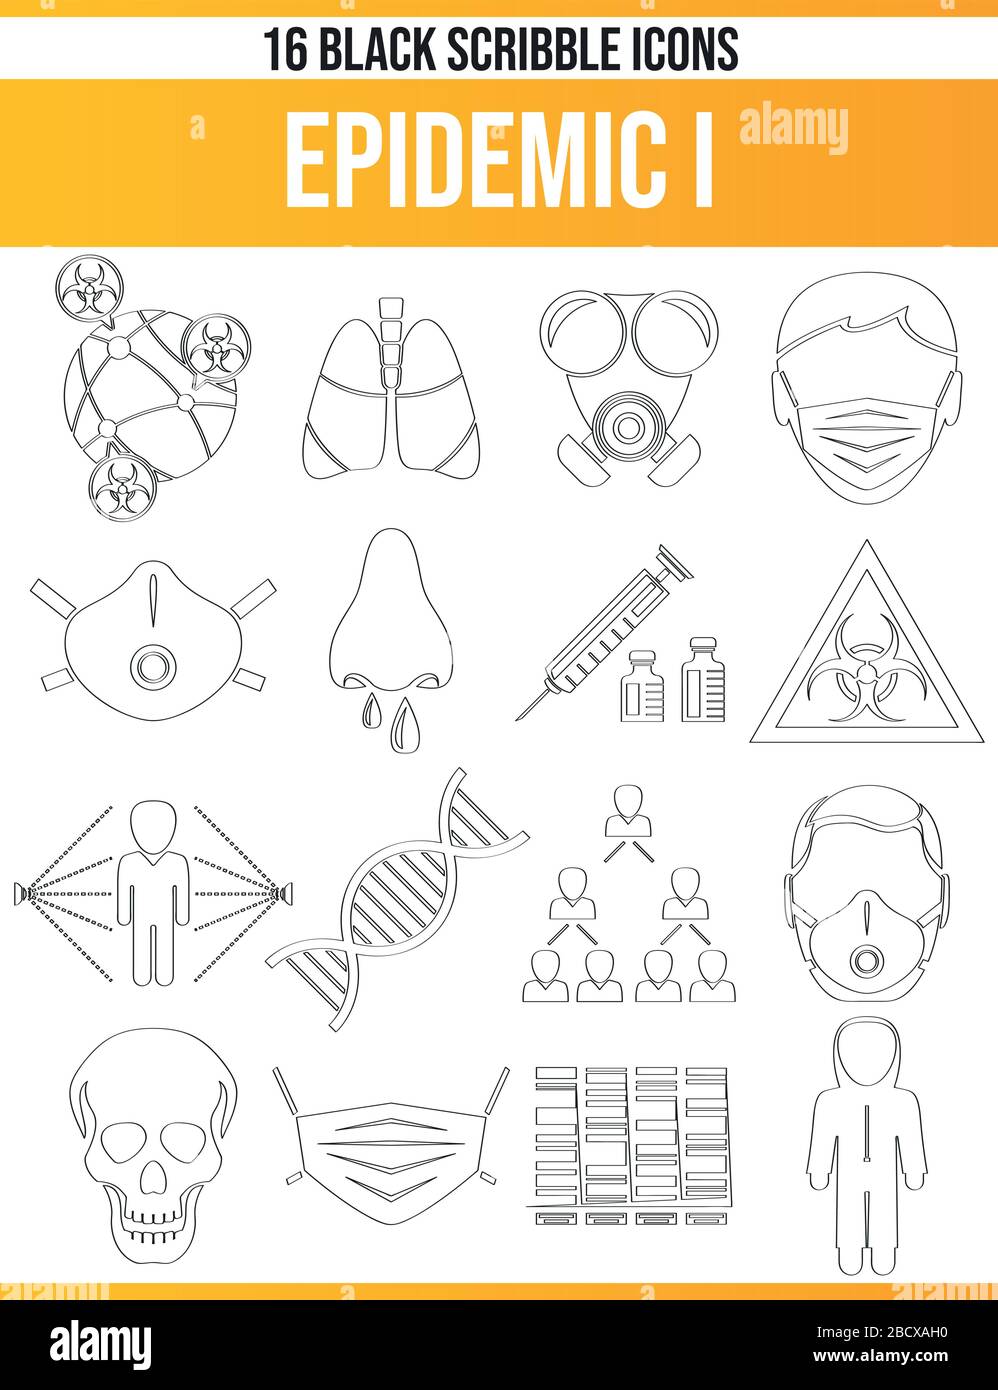 Black icons, or icons on the epidemic. This icon set is perfect for creative people and designers who need the subject virus and the epidemic in their Stock Vector